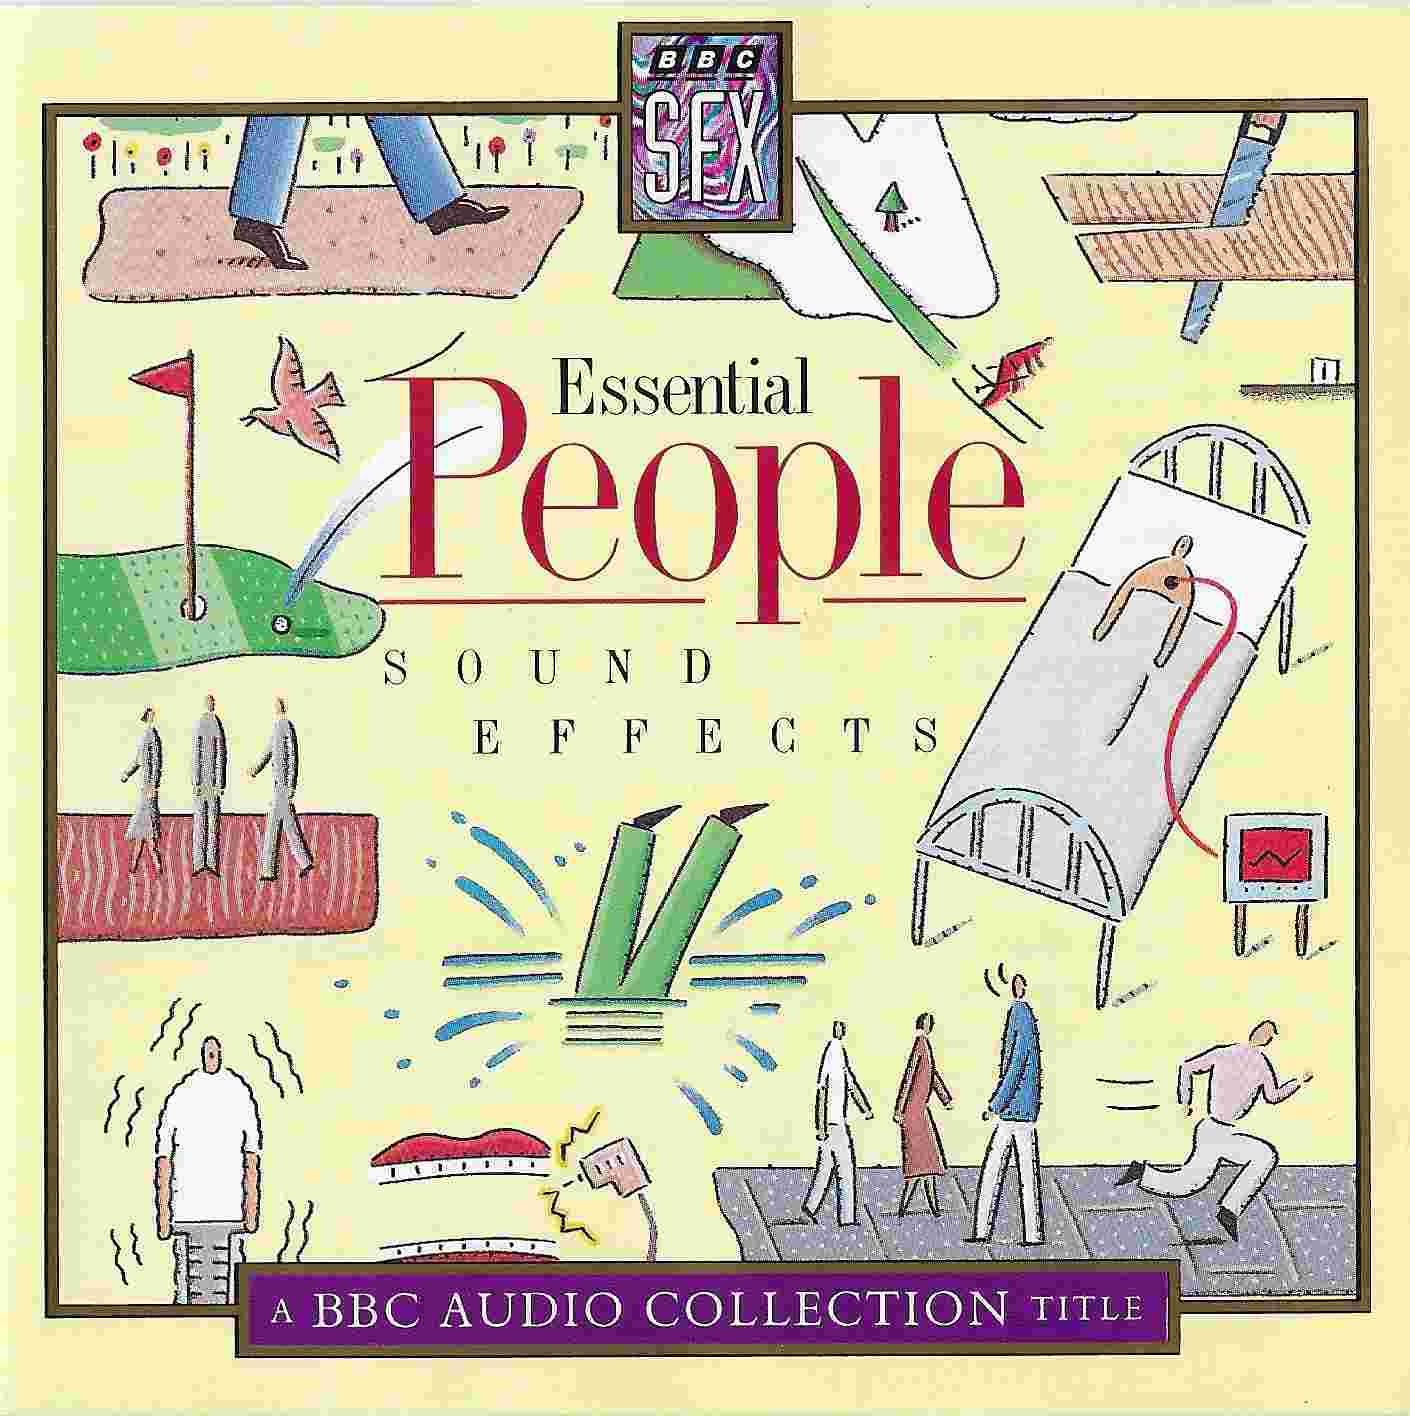 Picture of Essential people sound effects by artist Various from the BBC cds - Records and Tapes library